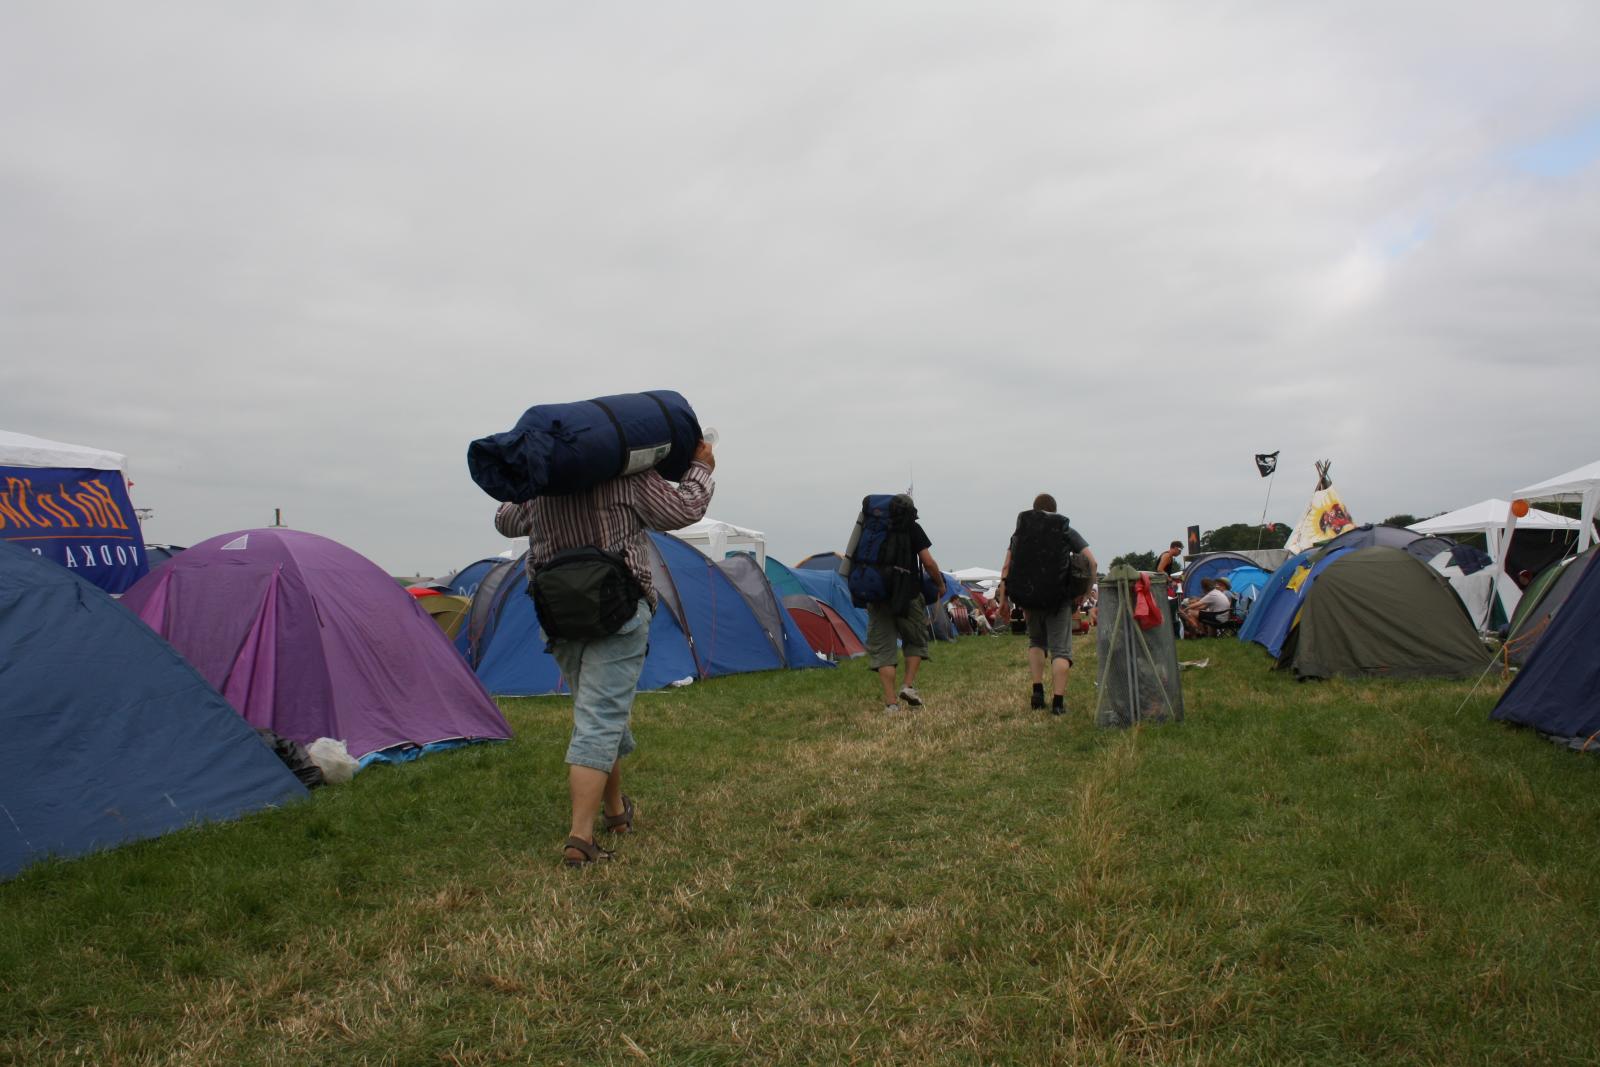 a person walking near tents on a grassy field